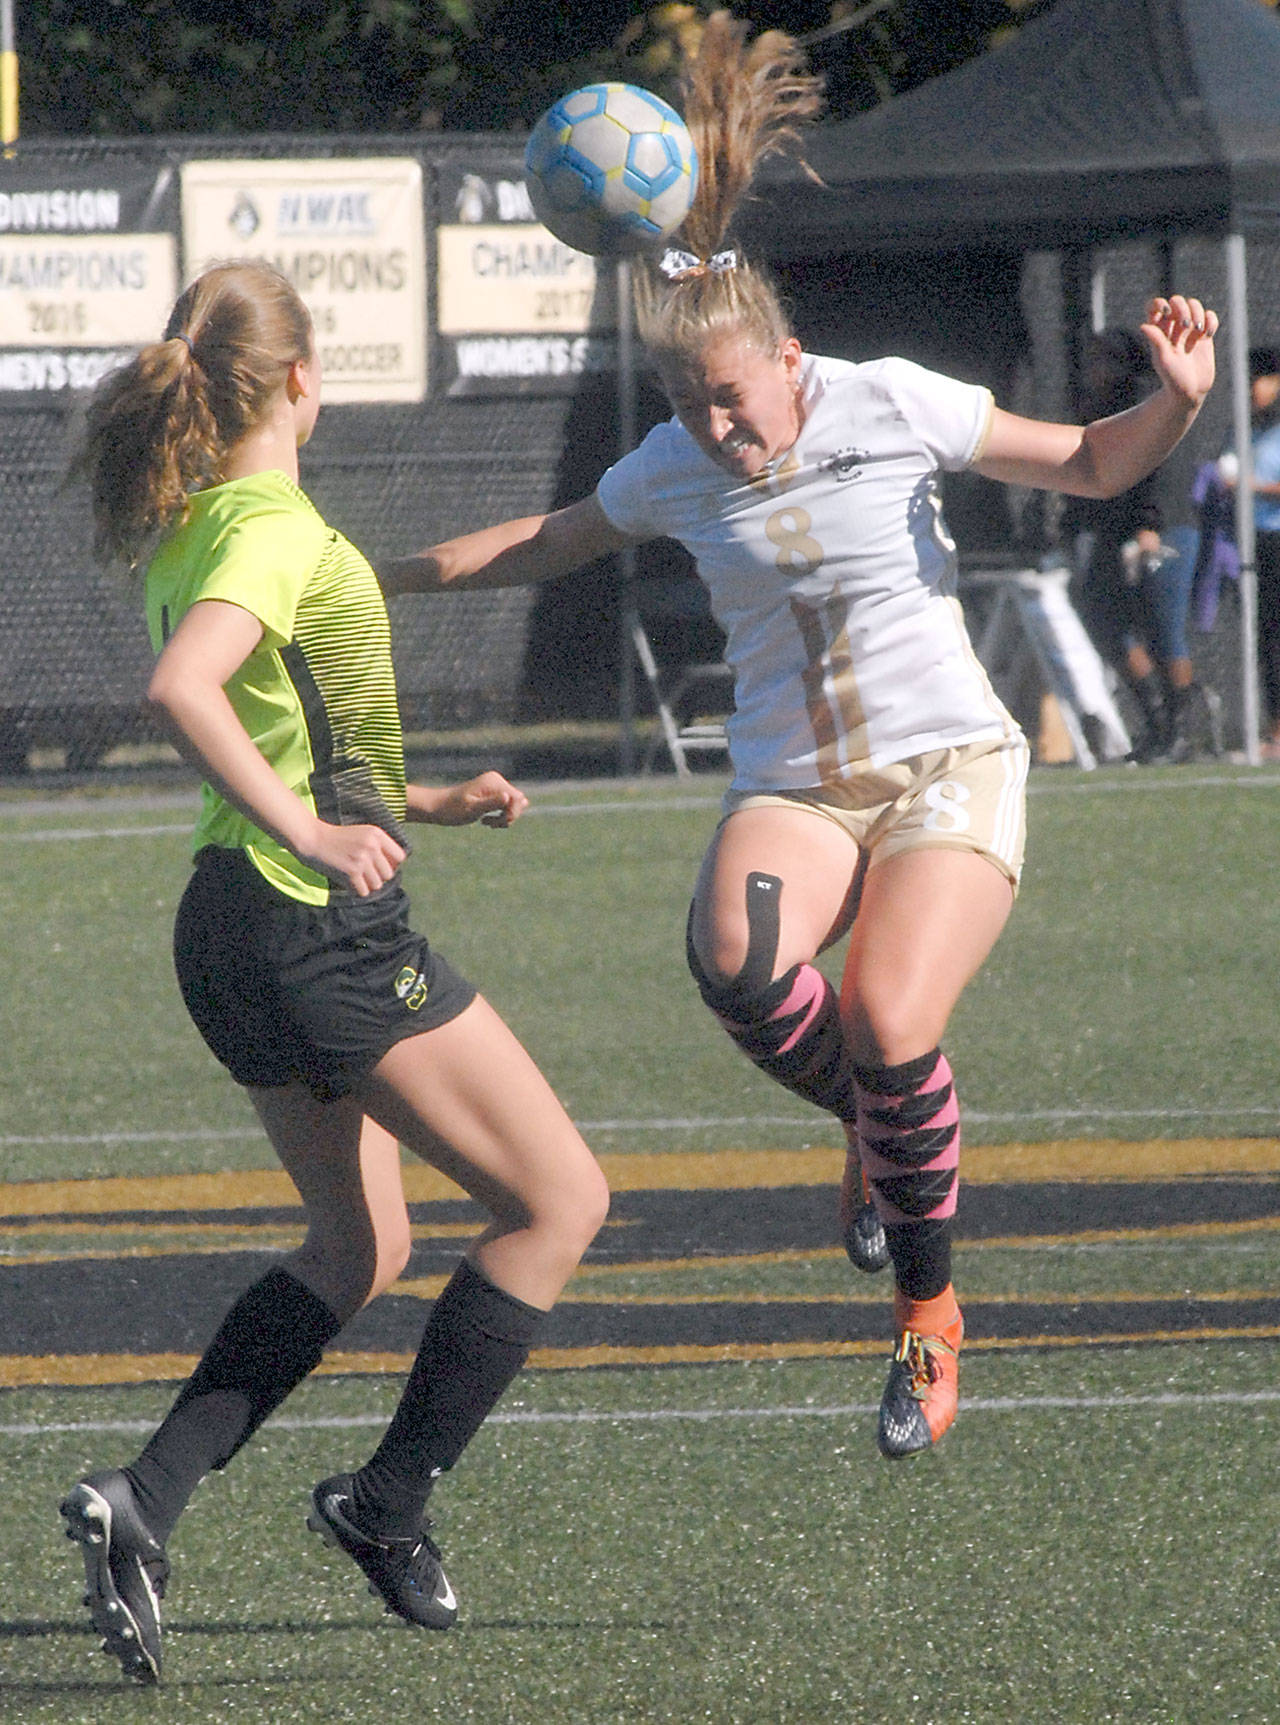 Keith Thorpe/Peninsula Daily News Peninsula’s Emilee Greve, right, takes the header in front of Shoreline’s Courtney Wagner on Saturday at Wally Sigmar Field in Port Angeles.